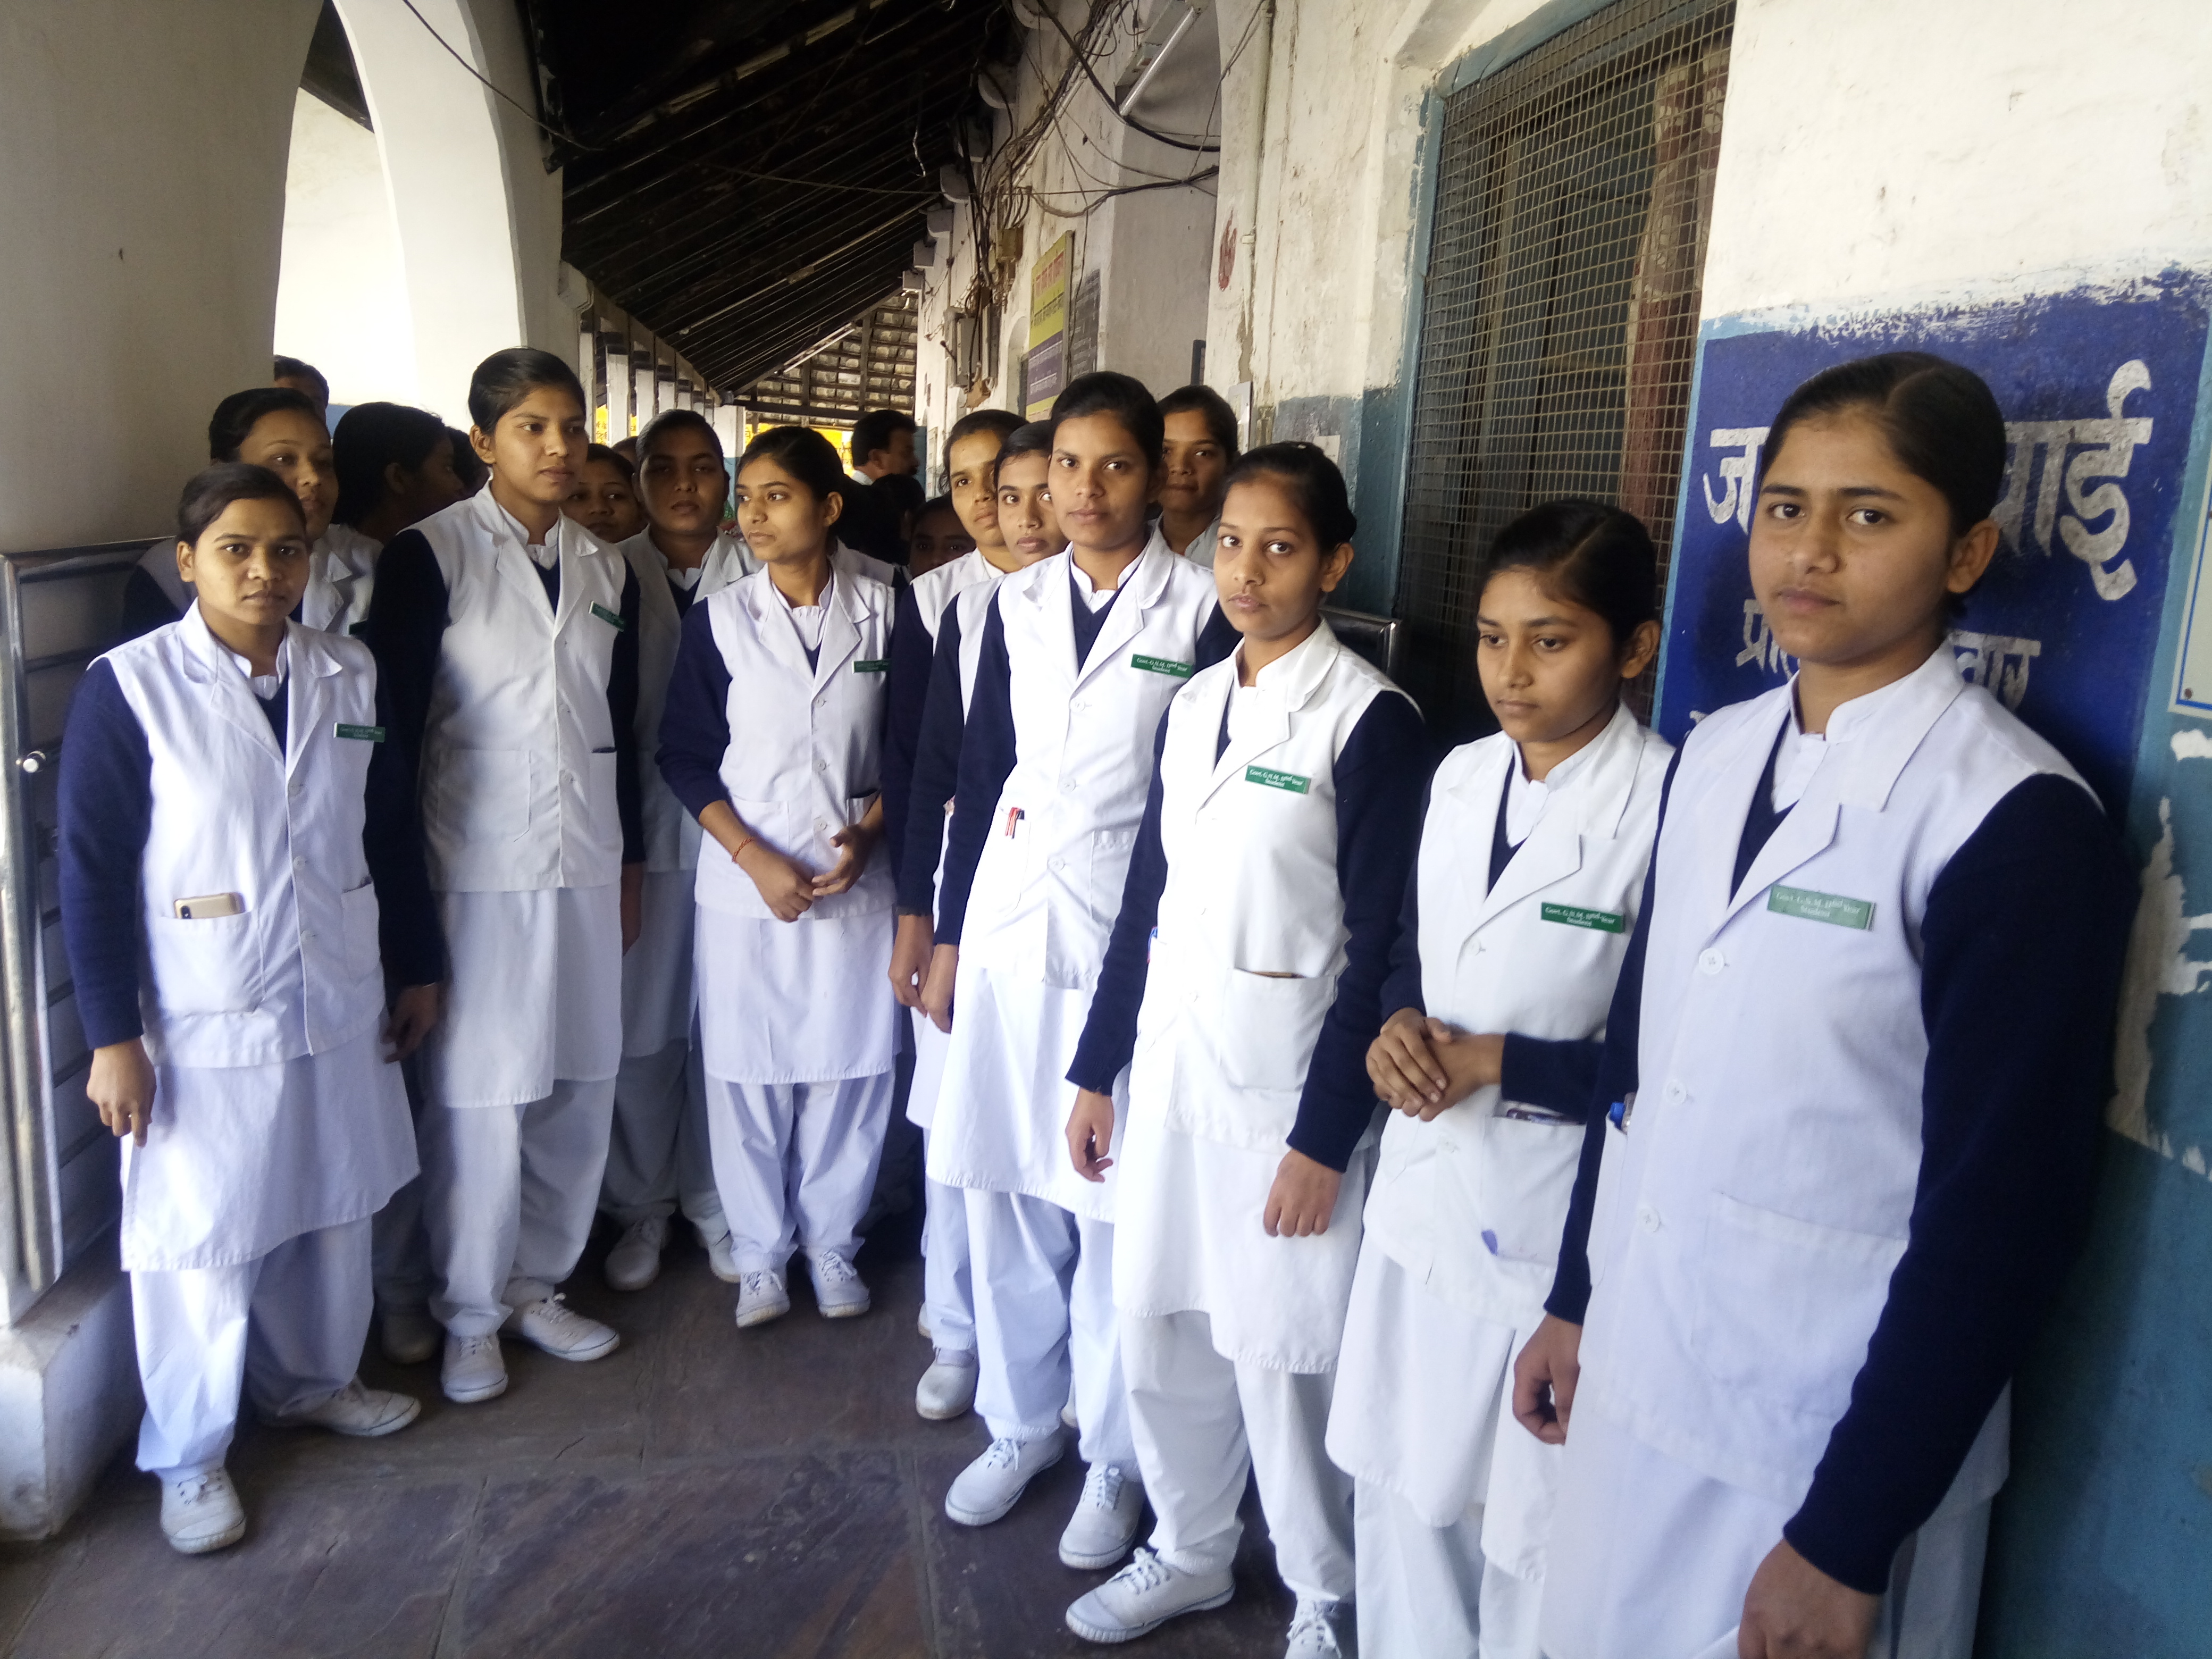 Nursing girls opened the protest, gathered in protest